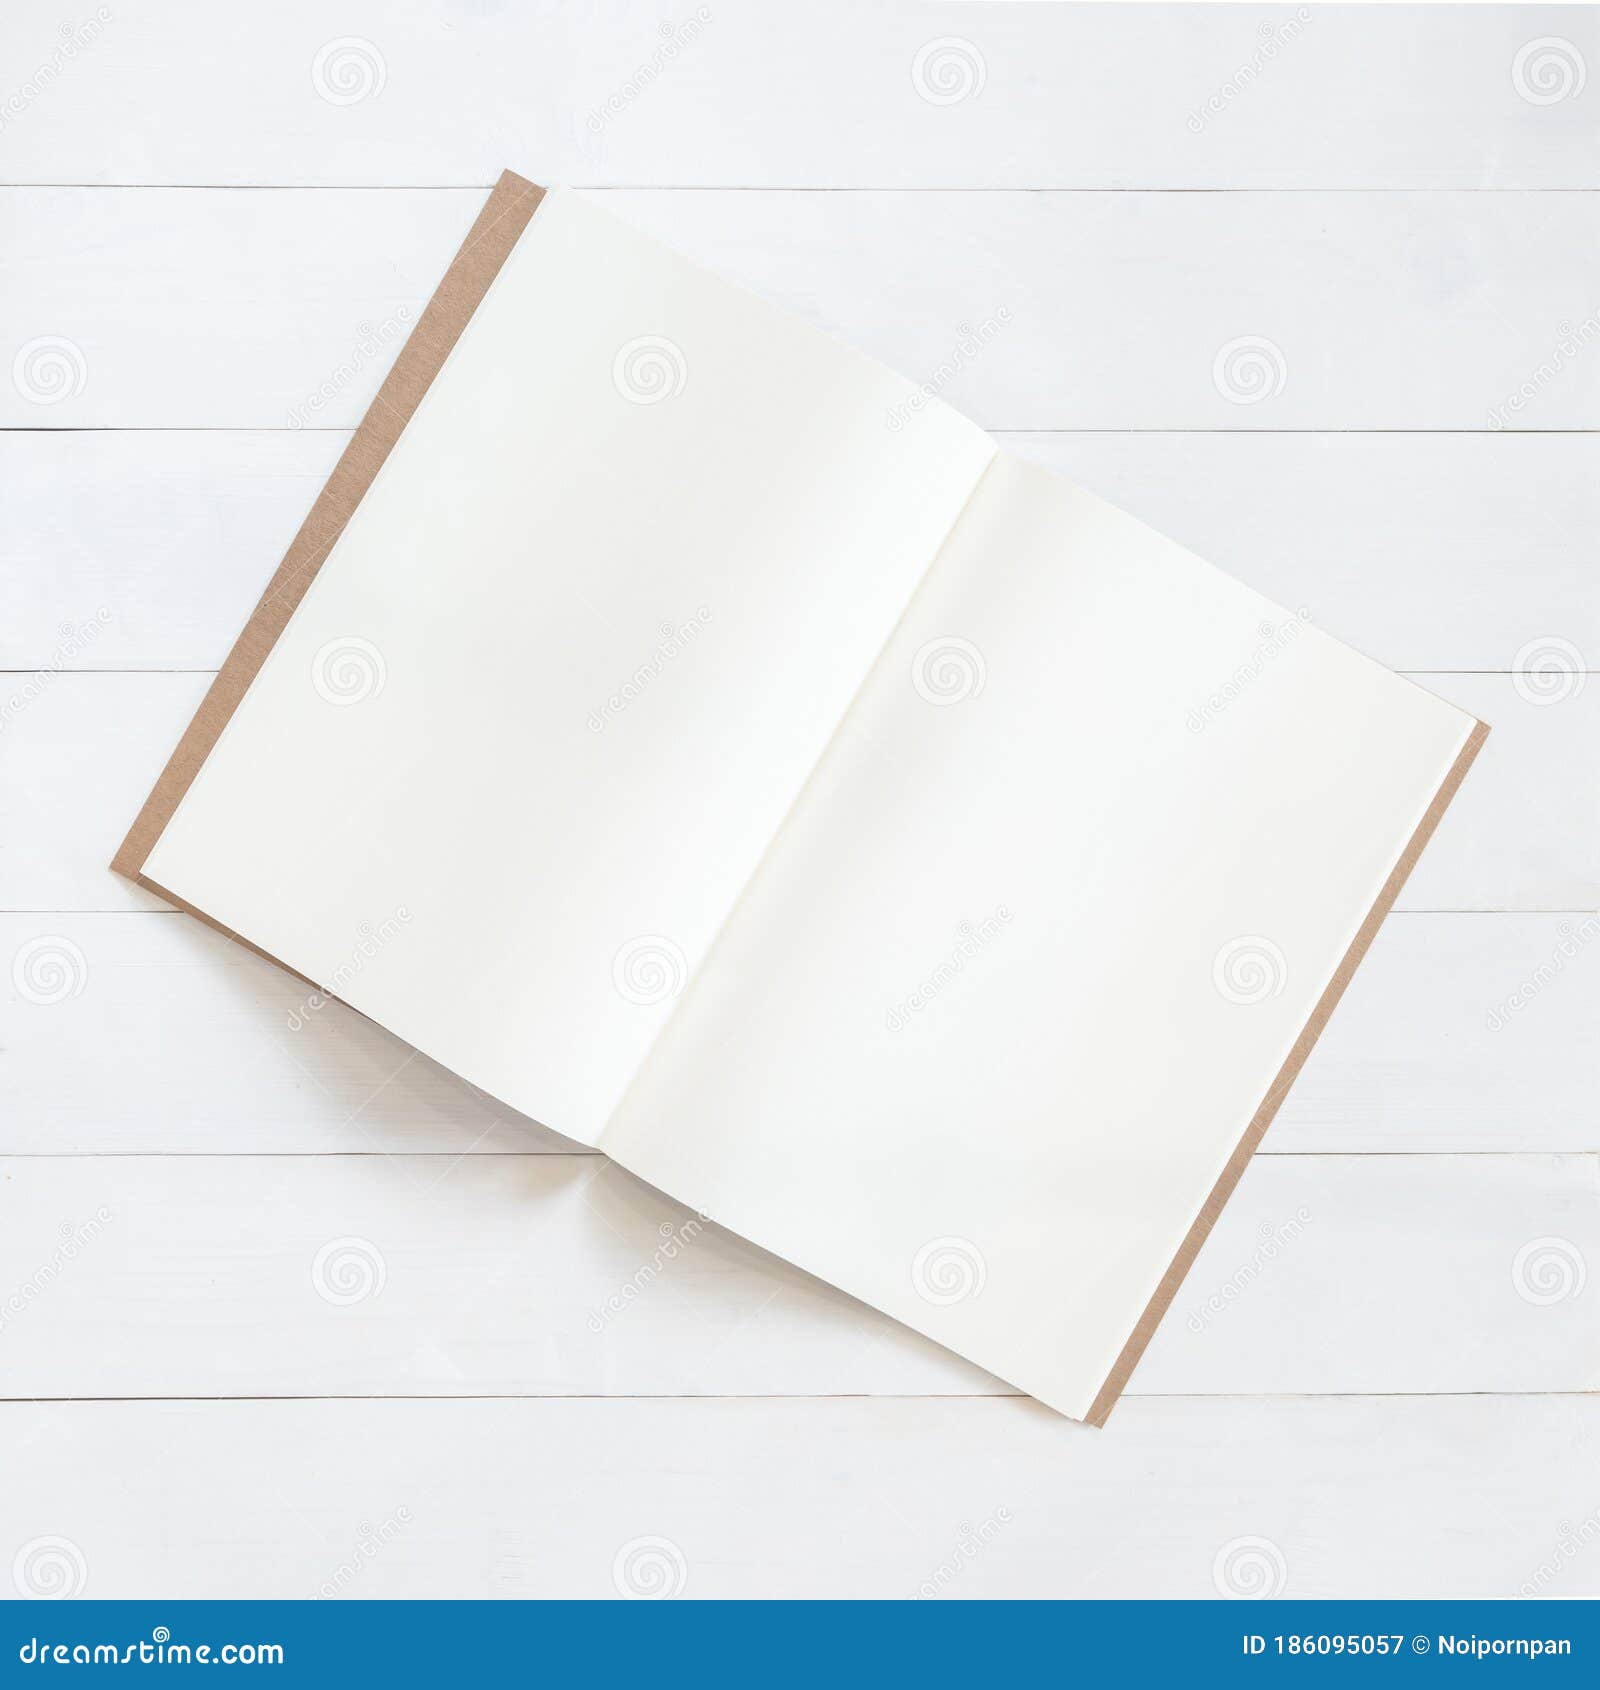 Download Book Mockup Template Open Page A4 Size Recycle Paper Flat Lay On White Wood Table From Top View Stock Image Image Of Open Board 186095057